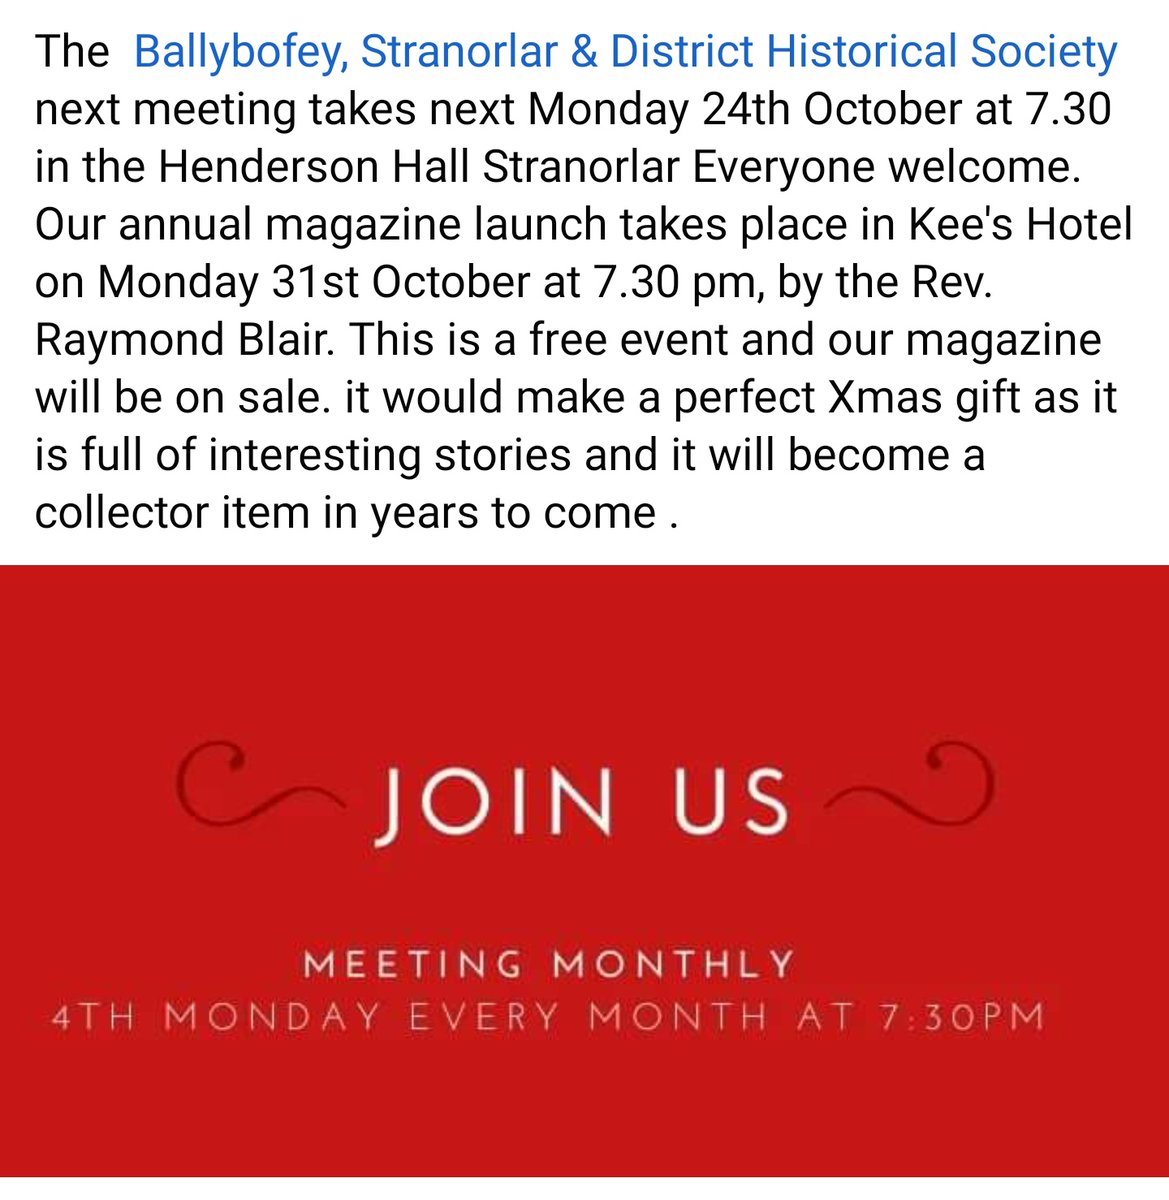 Two dates for your diary....tonight, 24th Oct is our monthly meeting at 7.30pm in the Henderson Hall, #Stranorlar Next Monday, 31st Oct sees our 9th Annual Launch in @KeesHotel #Stranorlar at 7.30pm by Rev Raymond Blair, President of Co.Donegal Historical Society. All Welcome.